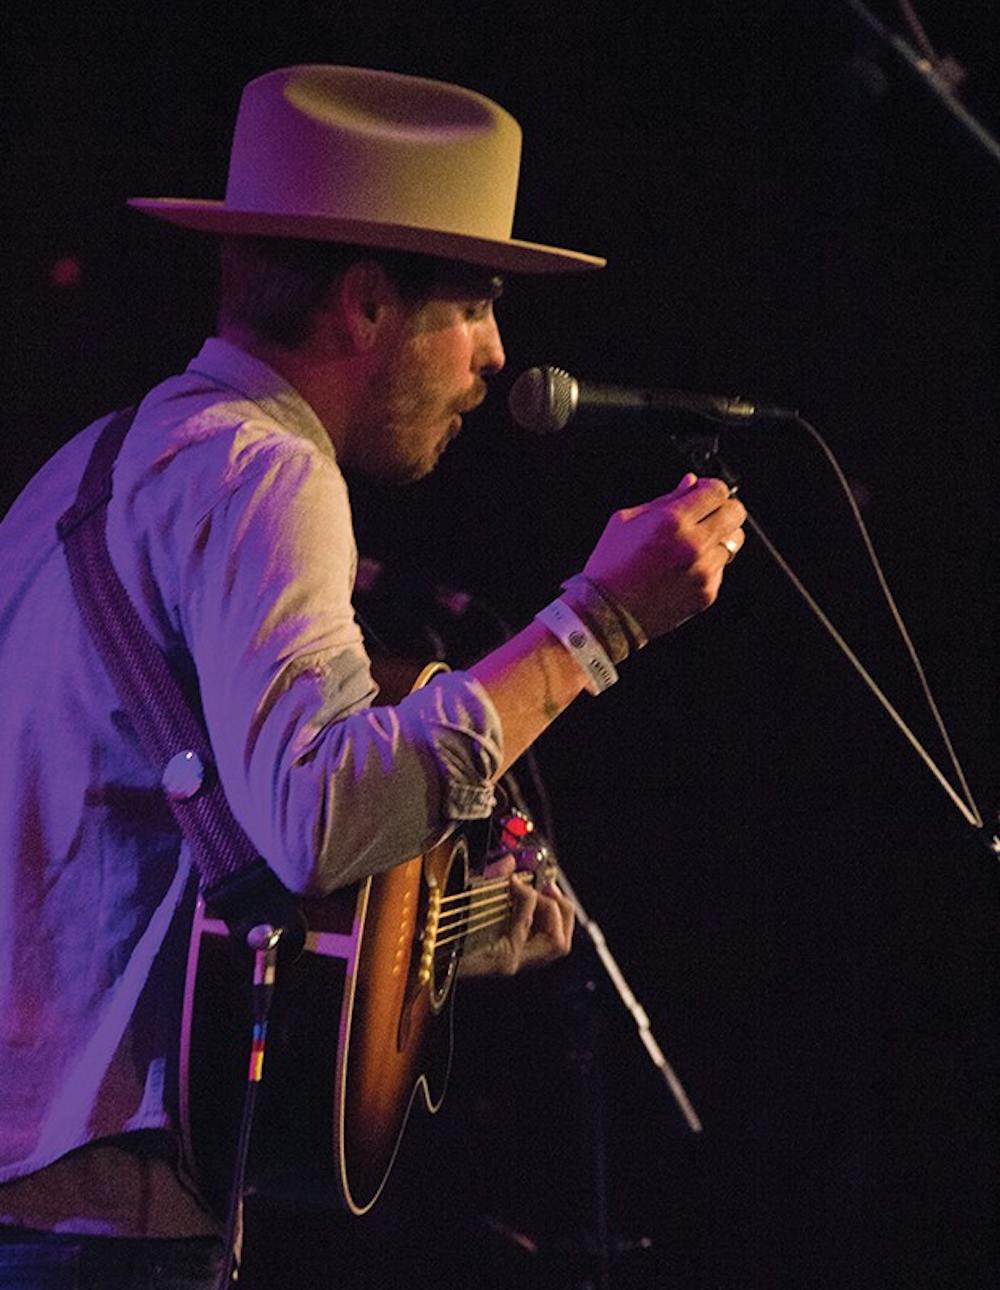 American Longspurs frontman, Zach Zimmerman, performs at an all-ages free show at Crescent Ballroom. Photo by Noemi Gonzalez